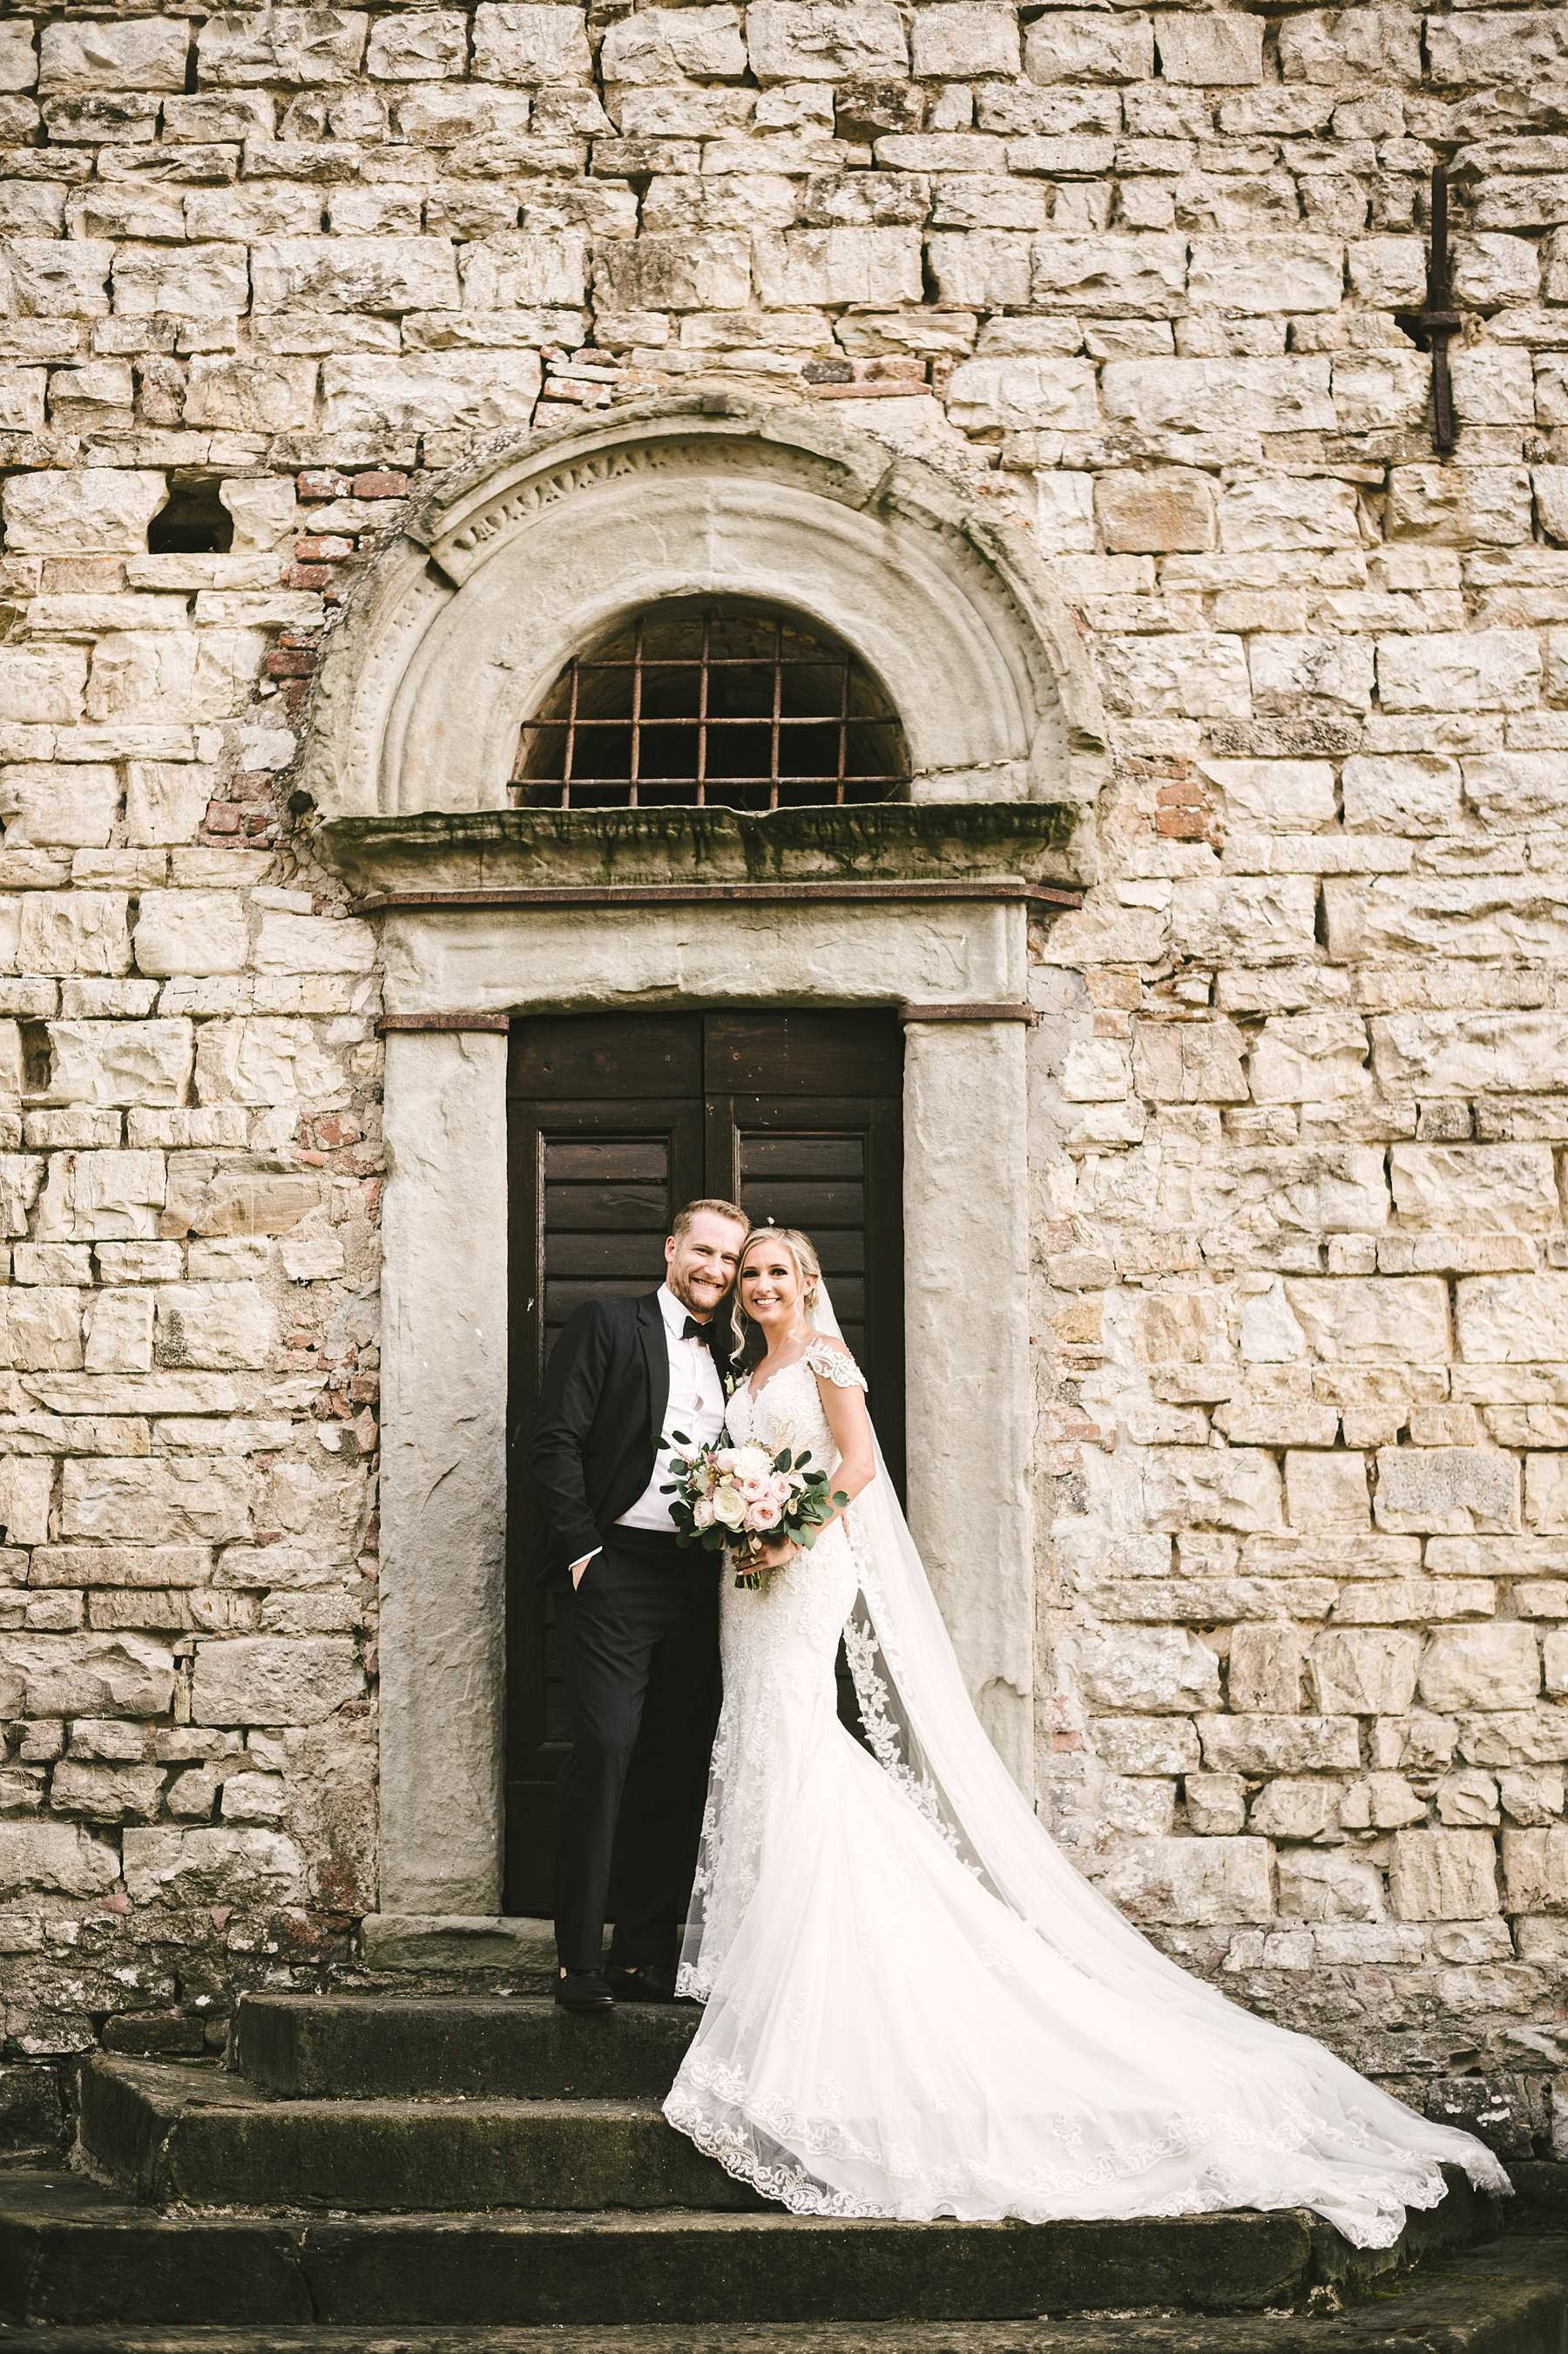 Romantic wedding in Italy at the charming Castello del Trebbio. Gorgeous bride and groom wedding portrait at Castello del Trebbio in the countryside of Tuscany near Florence